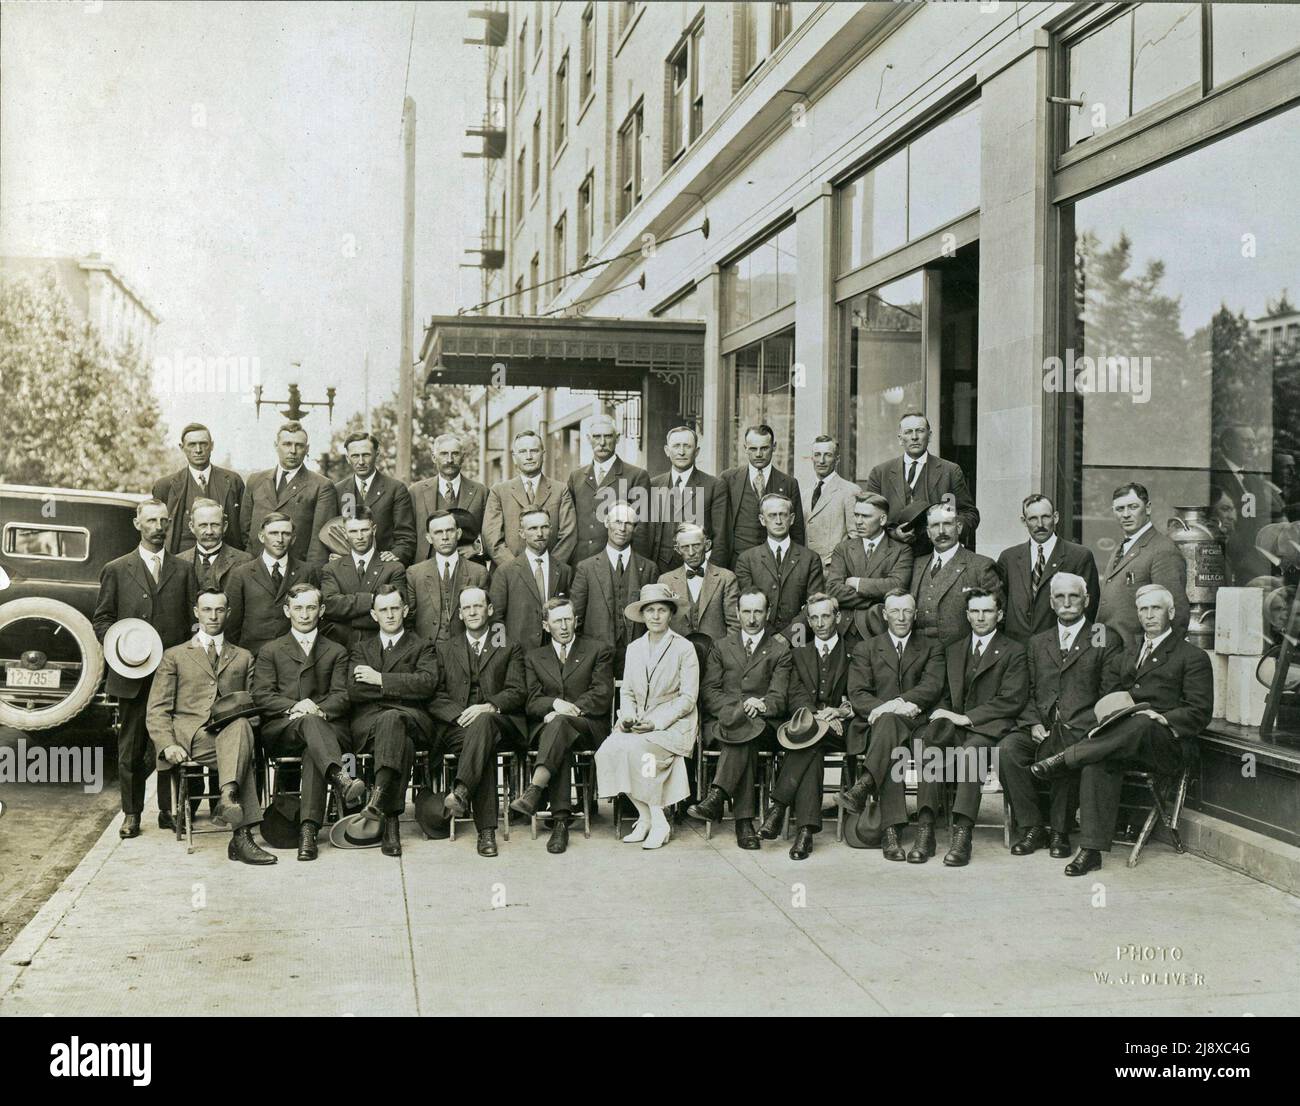 B&W photo of the UFA Legislative Members of Alberta elected July, 1921 in front of the Lougheed building. Caption under photograph reads: Front Row (Left to Right) - G. A. Forster, Lorne Proudfoot, A. M. Matheson, L. Peterson, N. S. Smith, Mrs. W. Parlby, Geo. MacLachlan, S. A. Carson, D. M. Kennedy, E. C. Cook, G. W. Smith, W. C. Smith / Middle Row (Left to Right) - W. M Washburn, Geo. Hoadley, G. N. Johnson, Laudas Joly, W. Fedun, D. H. Galbraith, Alex Moore, M. J. Conner, C. O. F. Wright, O. L. McPherson, D. Cameron, W. H. Shield, A. B. Claypool / Back Row (Left to Right) - P. J. Enzenauerm Stock Photo